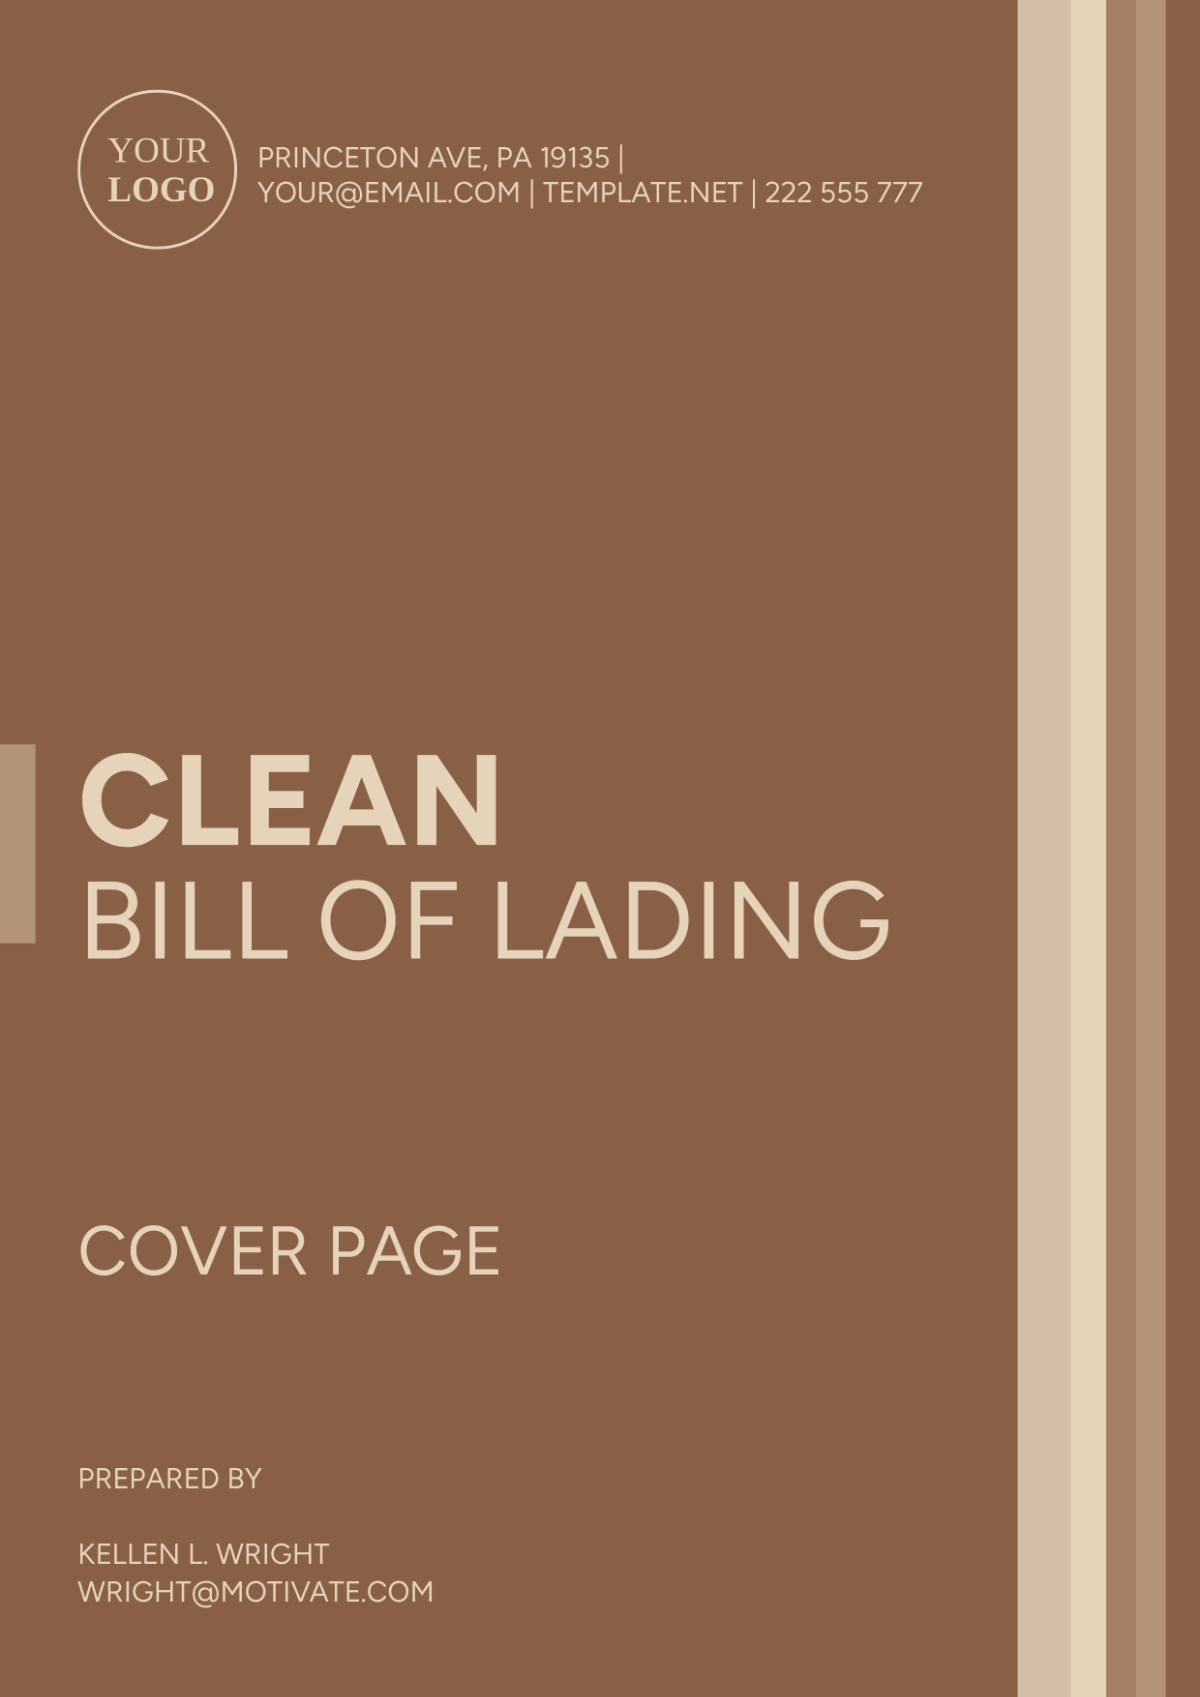 Clean Bill of Lading Cover Page Template